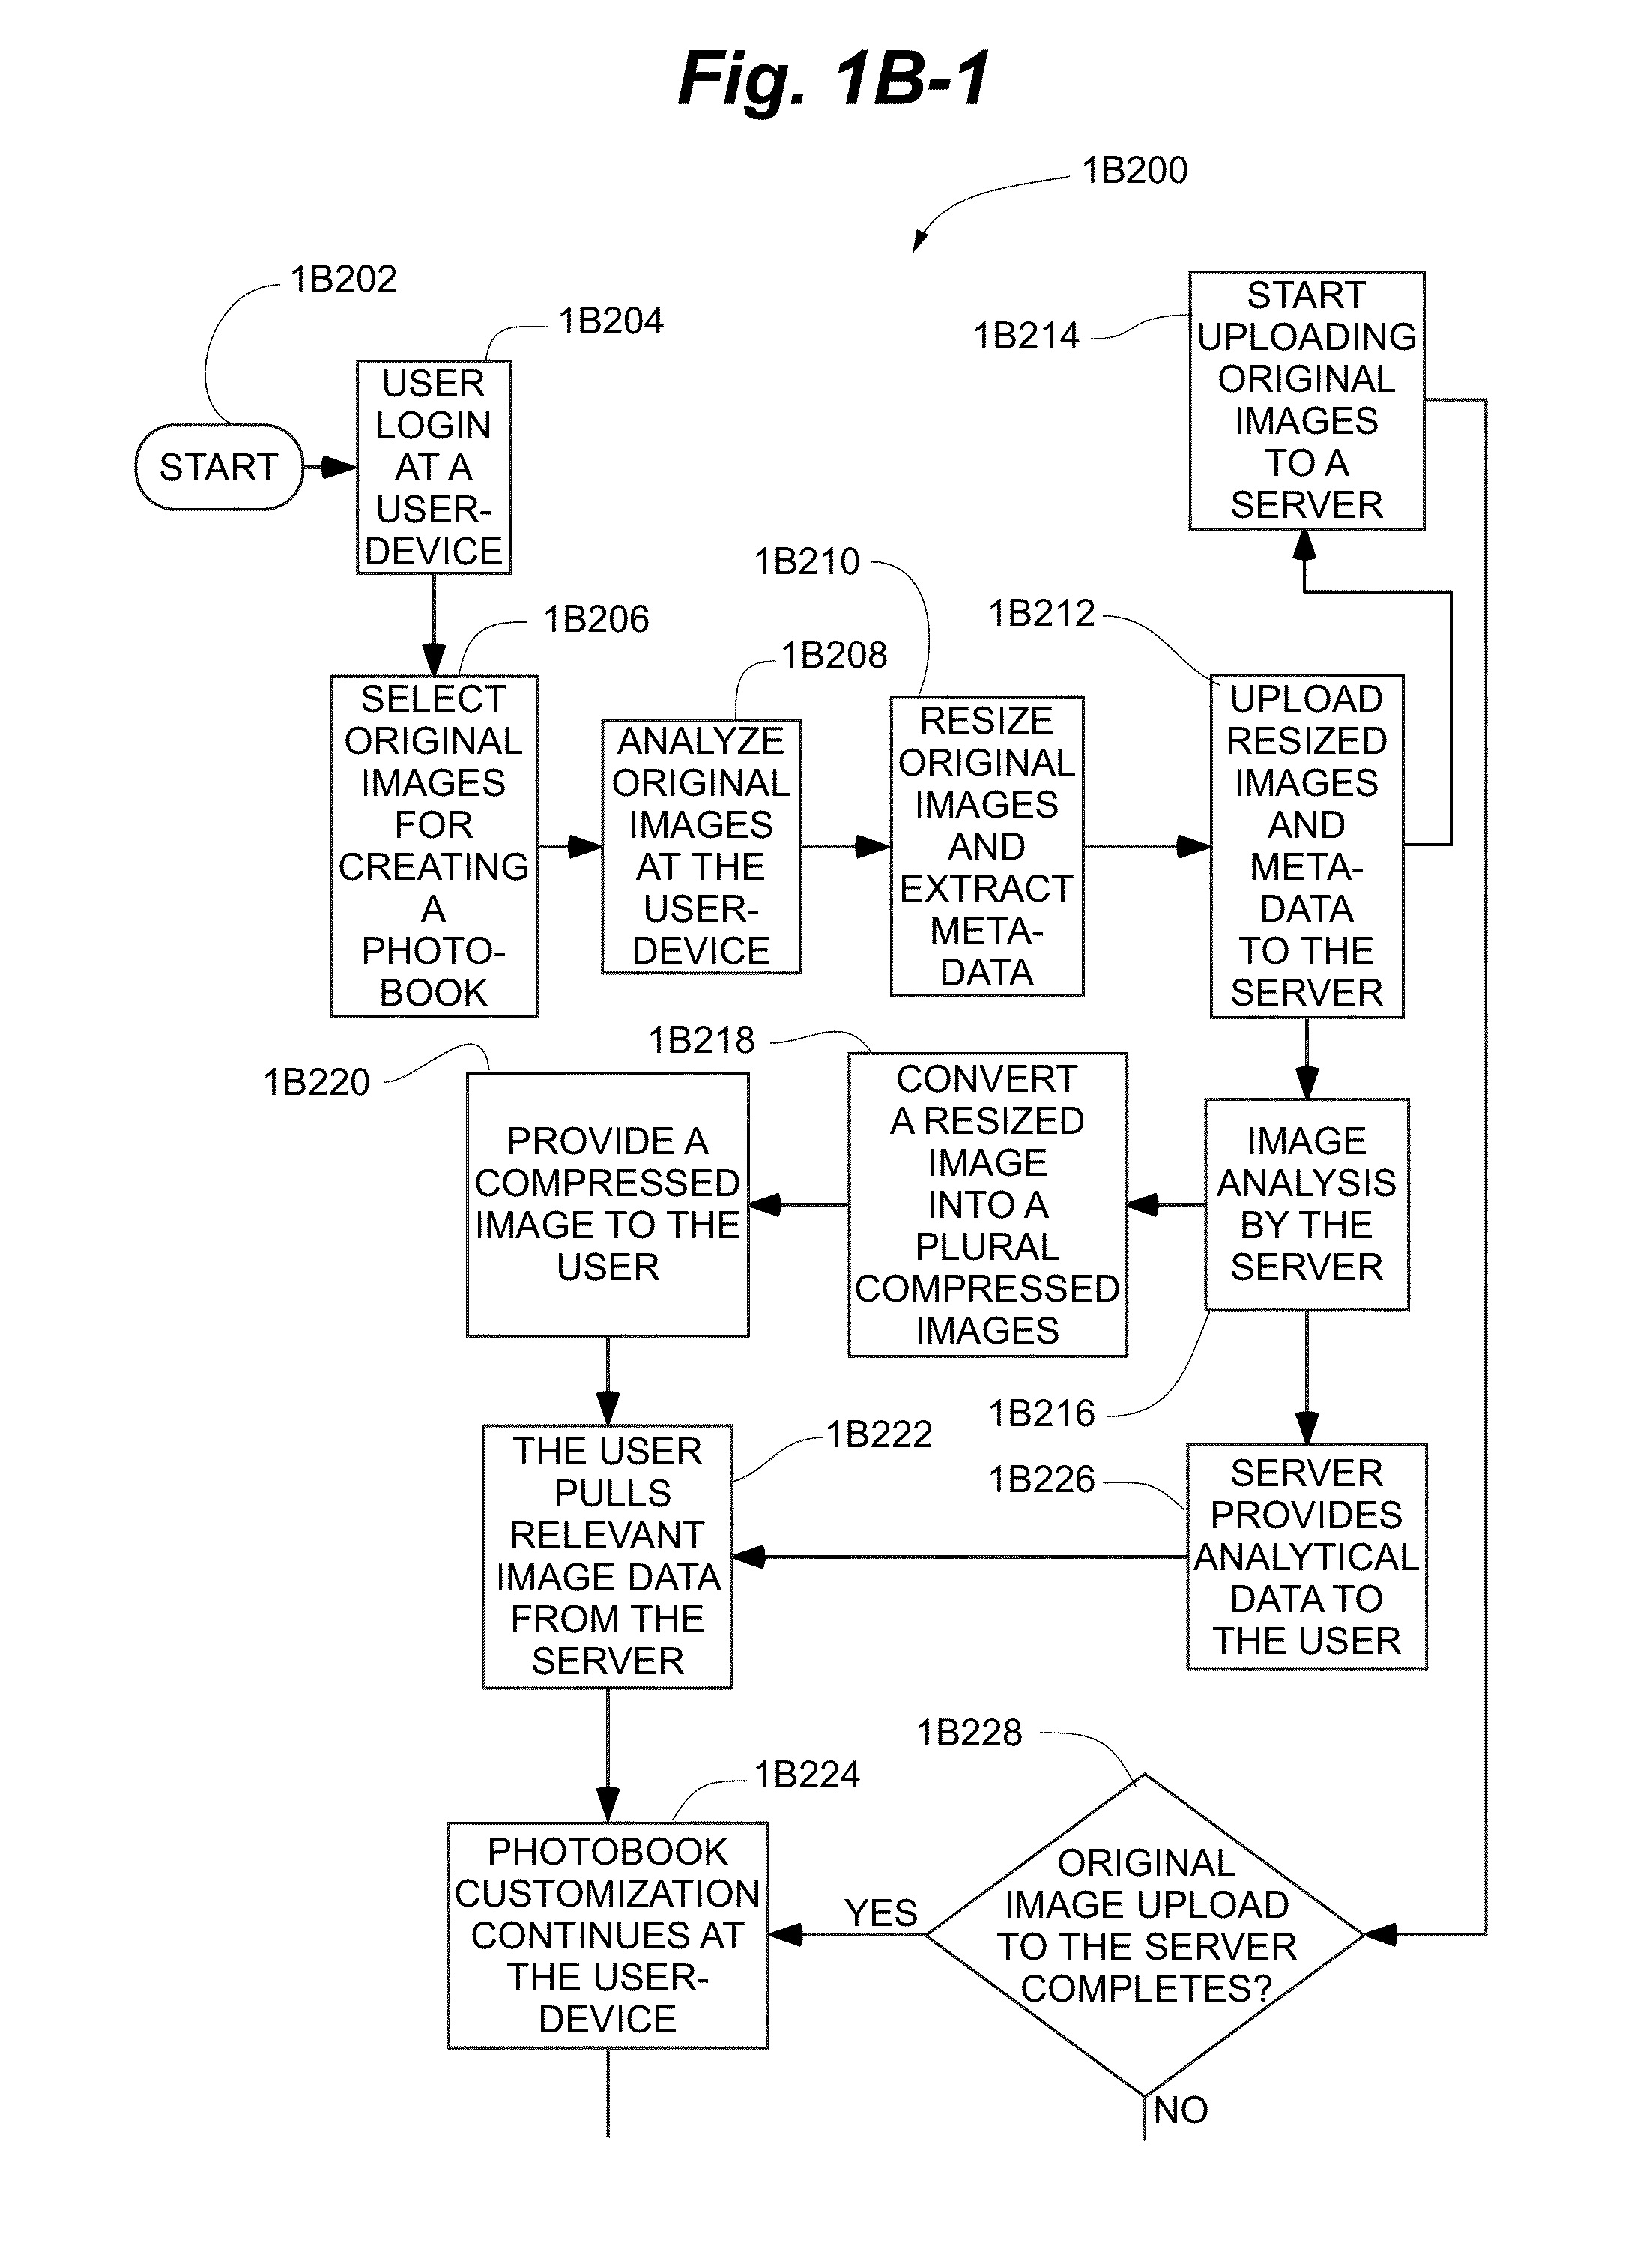 Systems and methods for generating autoflow of content based on image and user analysis as well as use case data for a media-based printable product